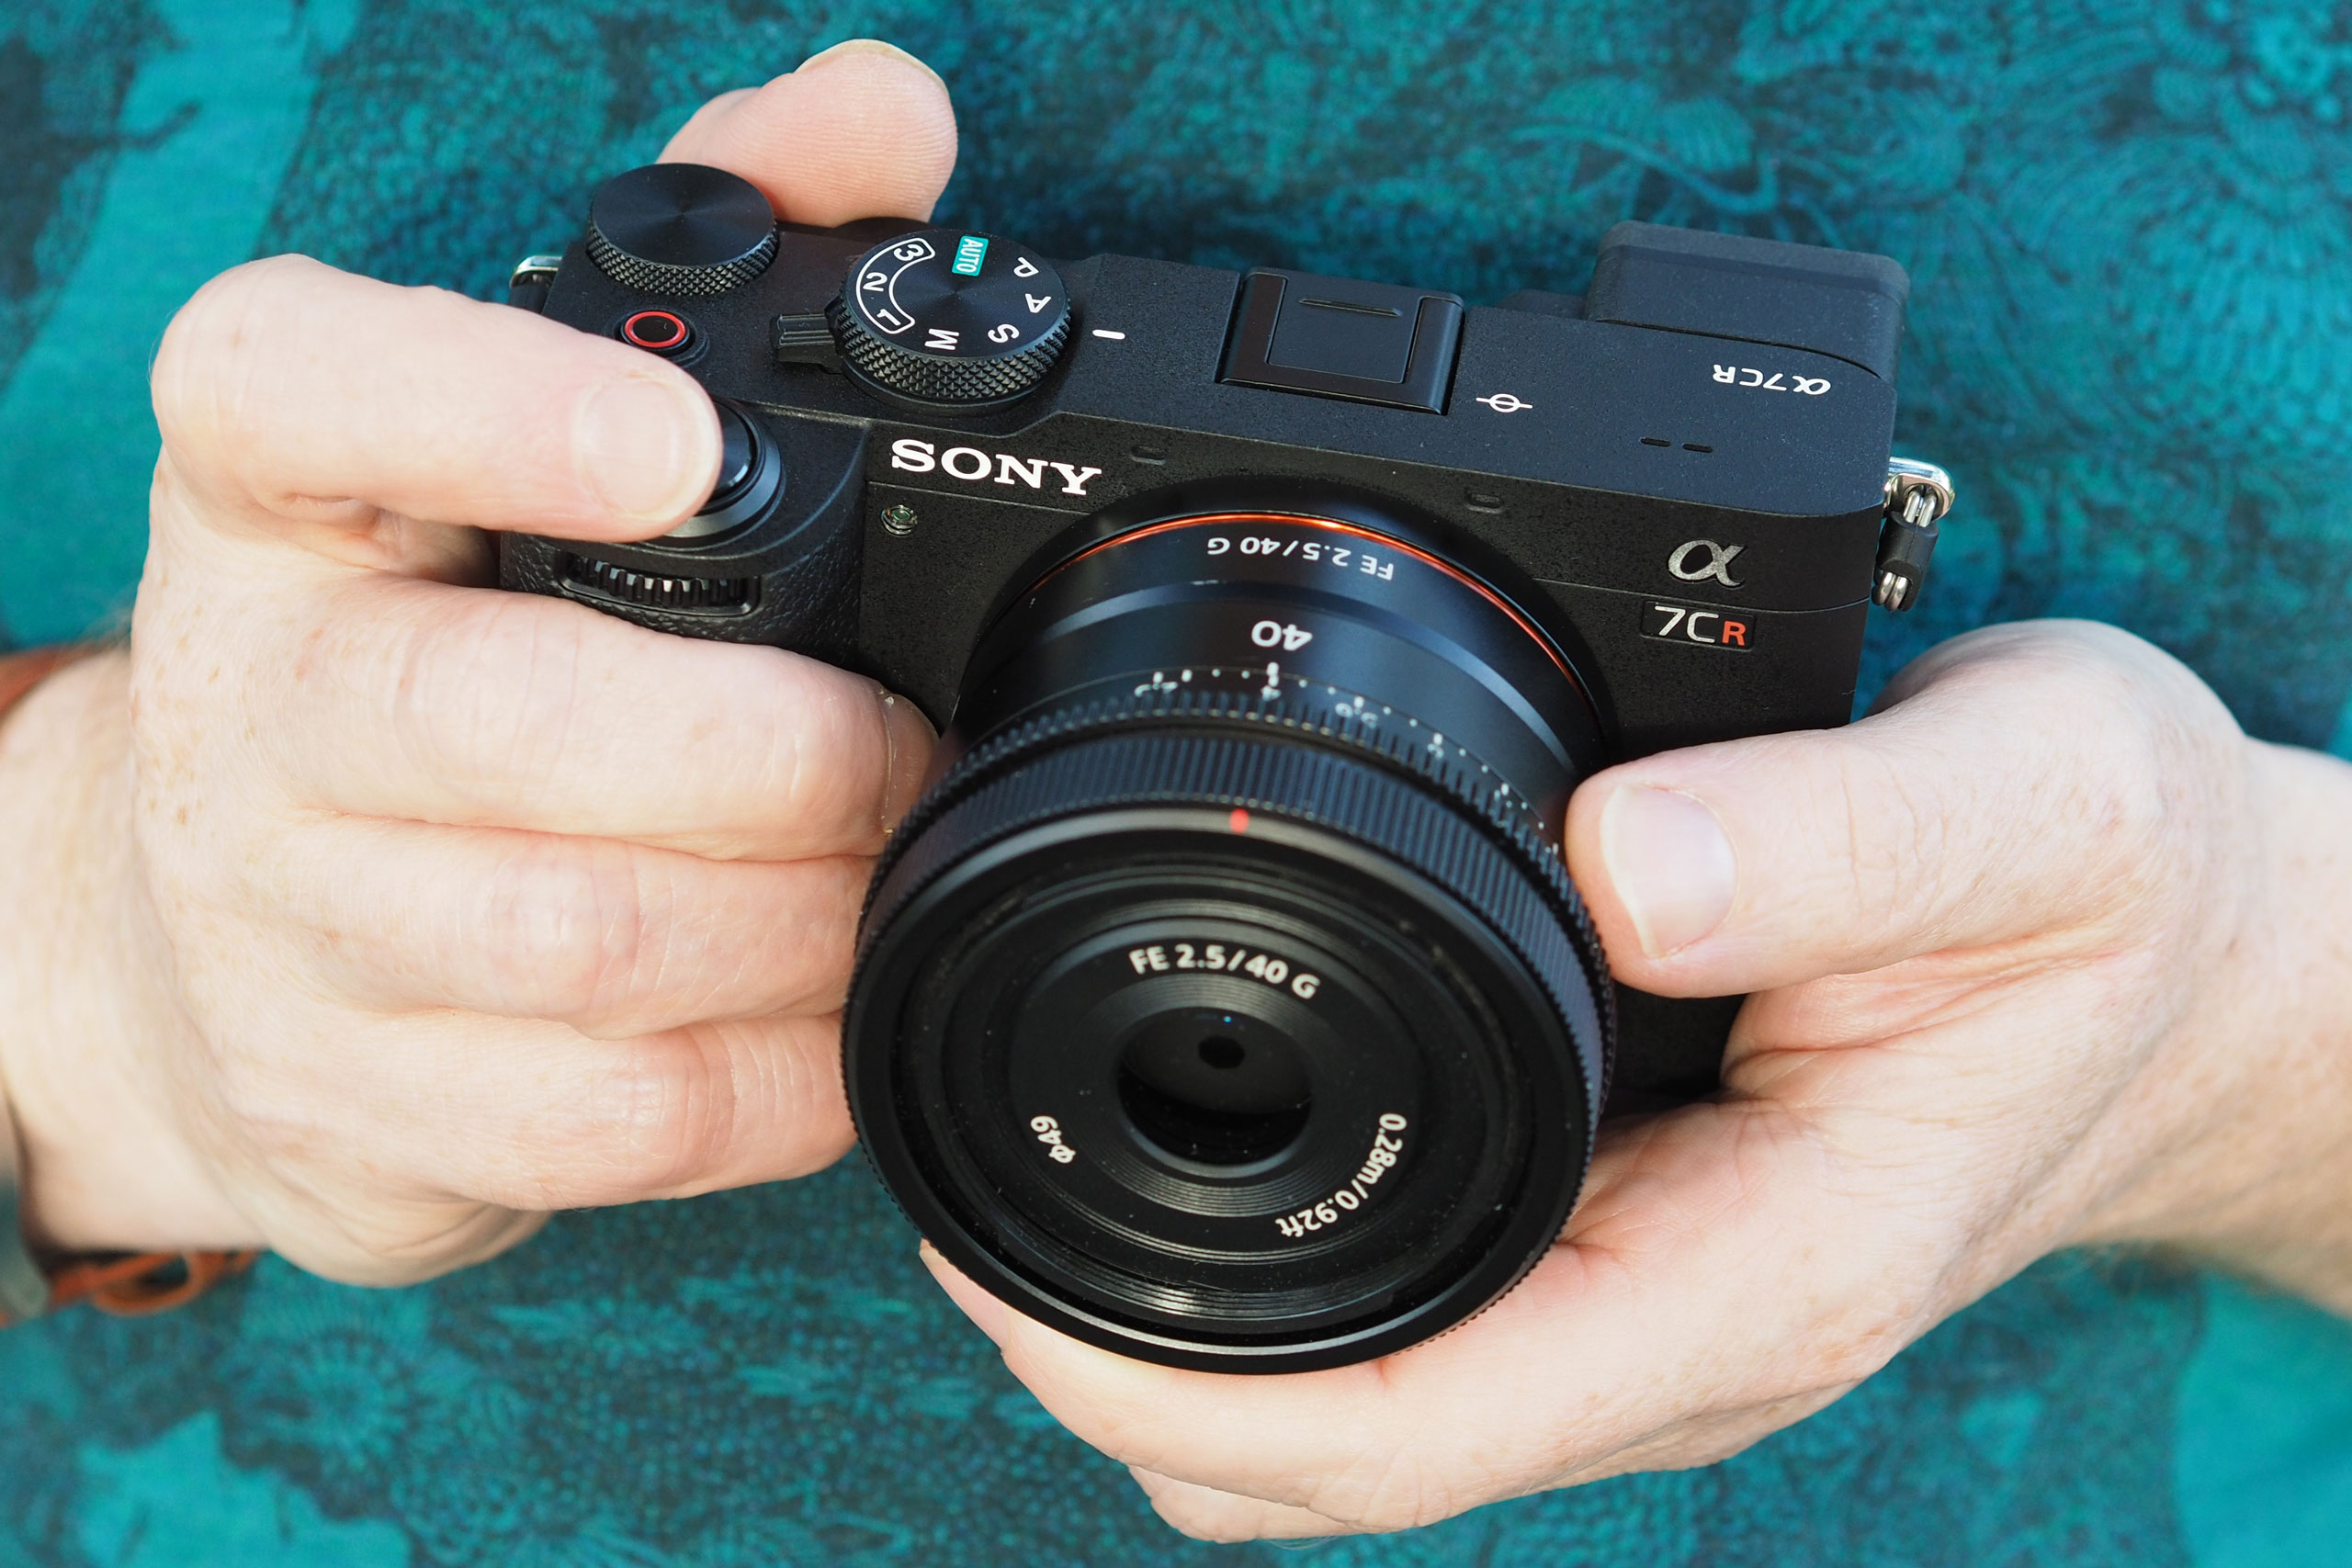 Sony Alpha 7C R Review